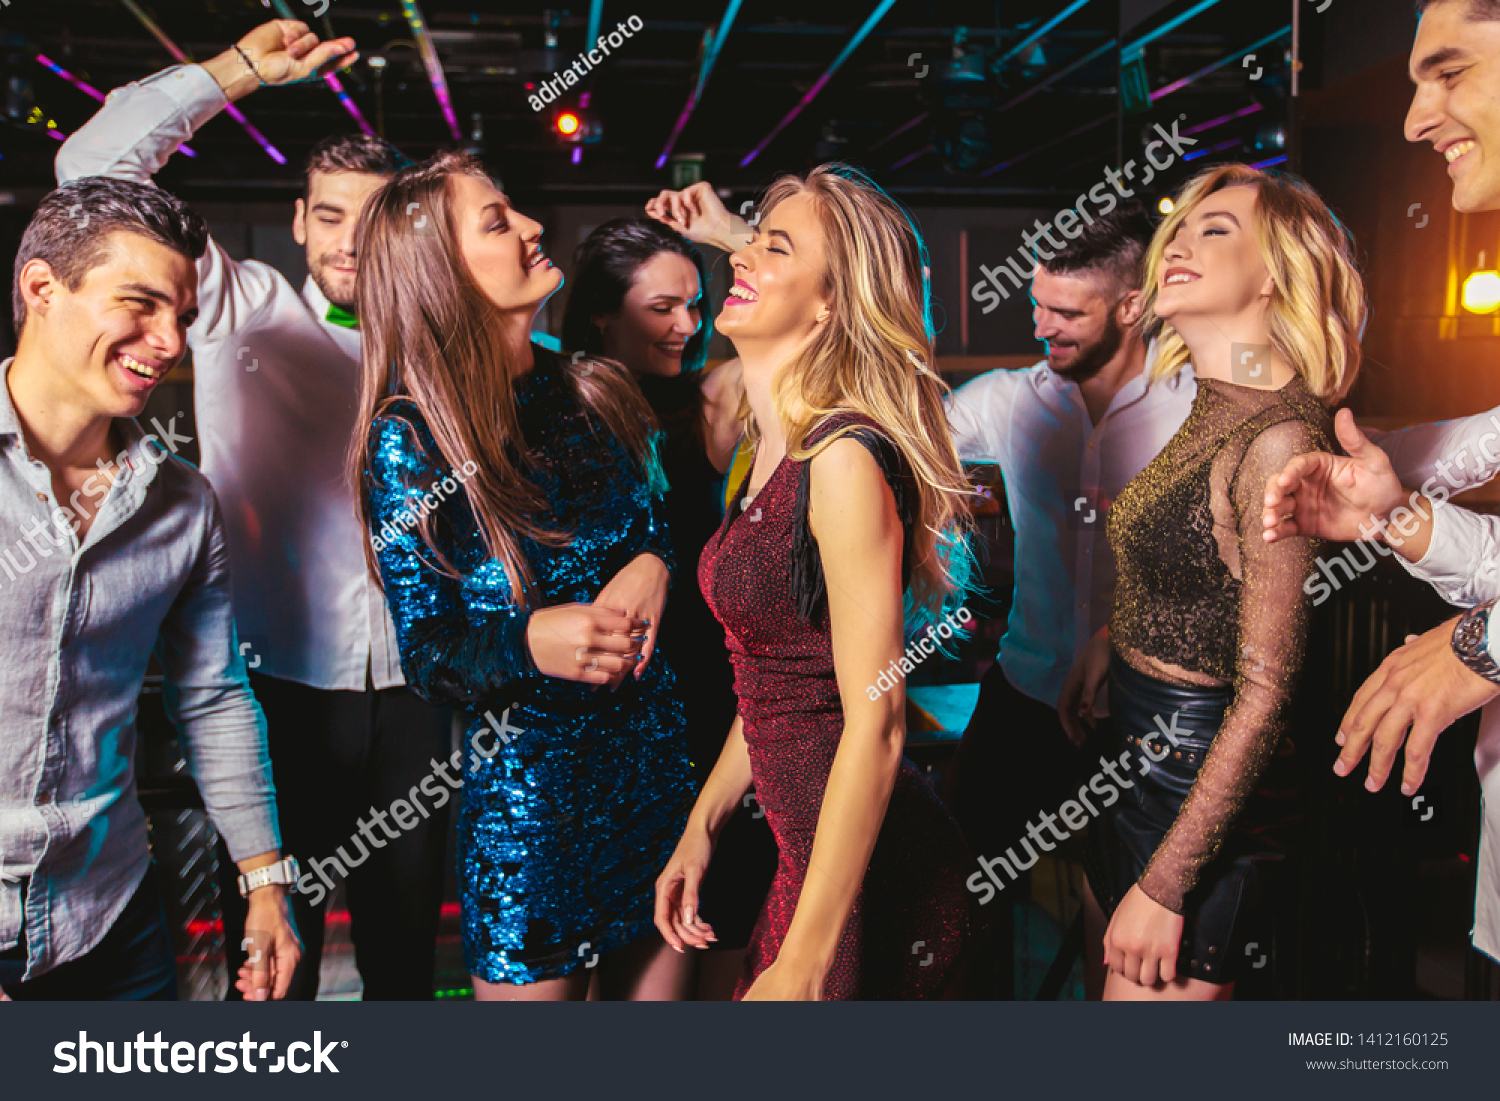 Young Happy People Dancing Club Nightlife Stock Photo 1412160125 ...